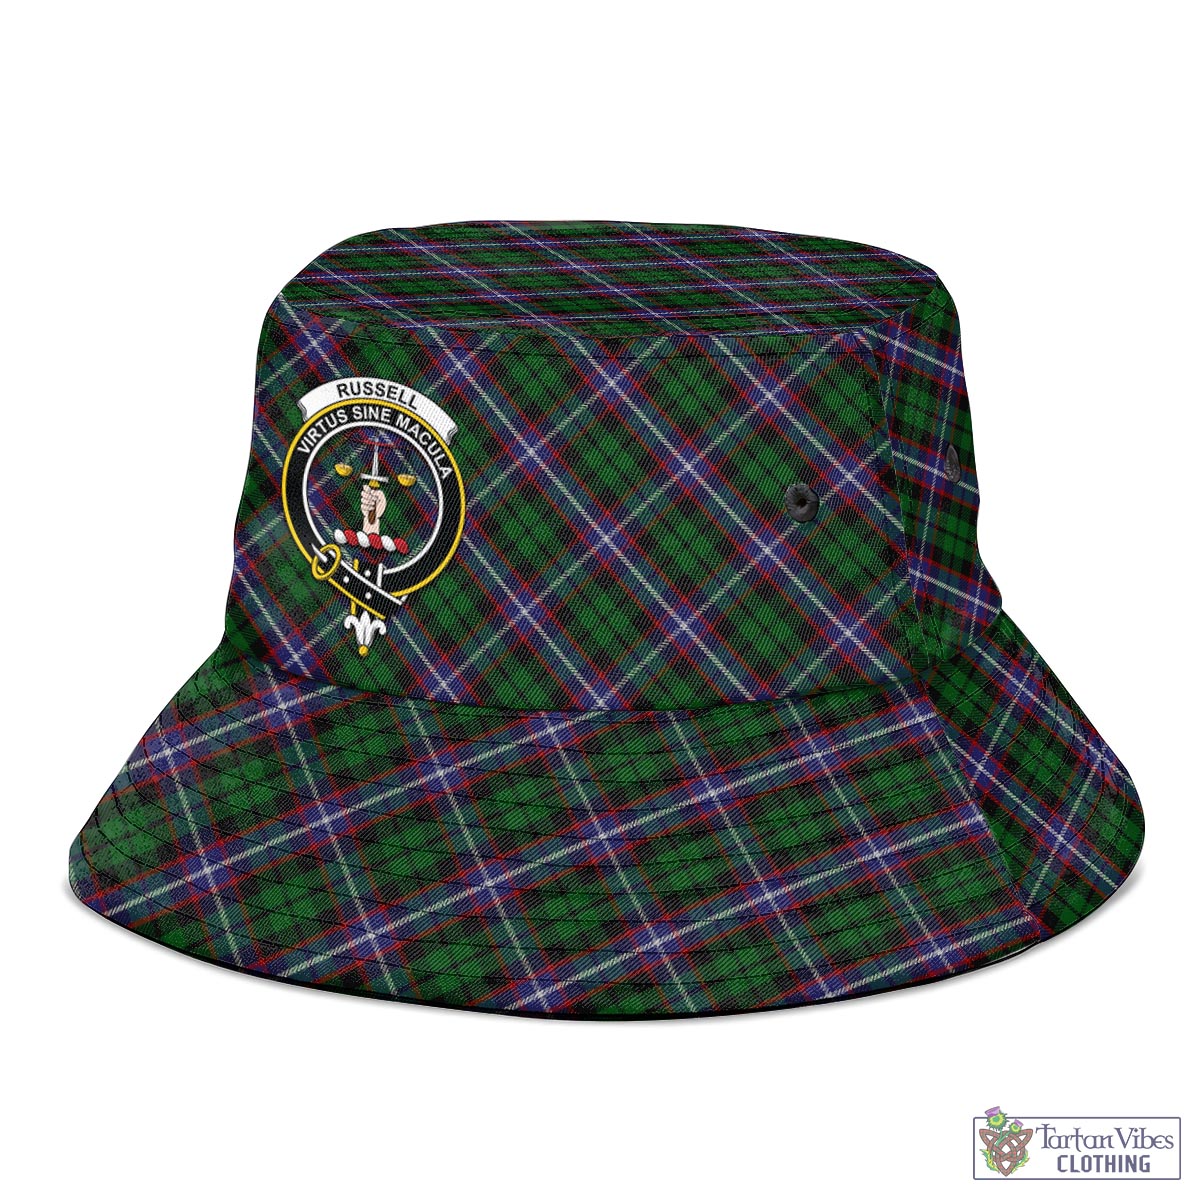 Tartan Vibes Clothing Russell Tartan Bucket Hat with Family Crest